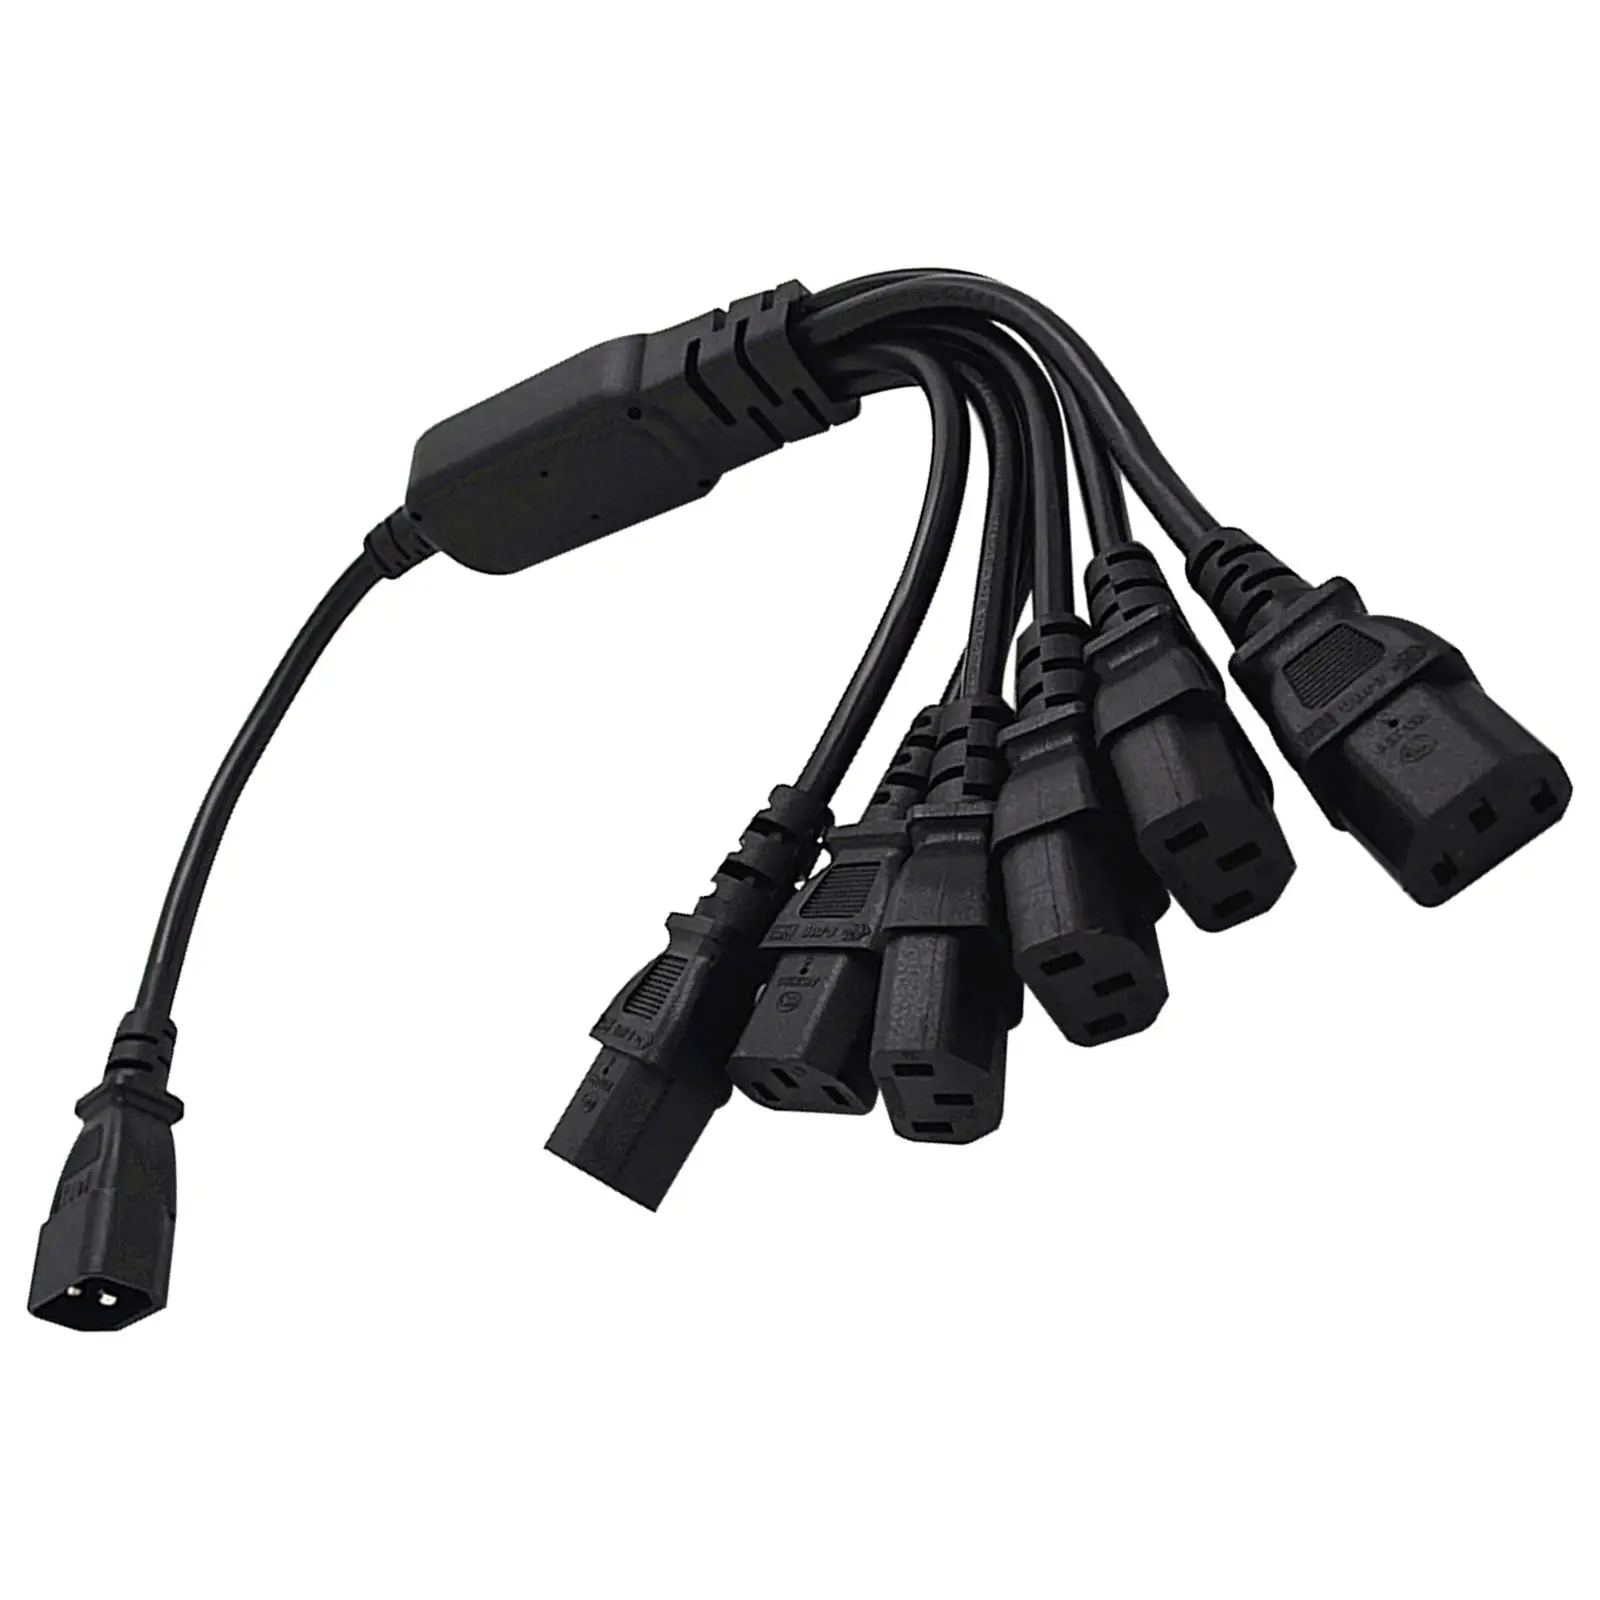 Pdu Ups System C14 Male to 6x C13 Female Y Splitter Extension Cord 10A 250V 2500W 0.6M for Printer Monitor PC Computer Projector